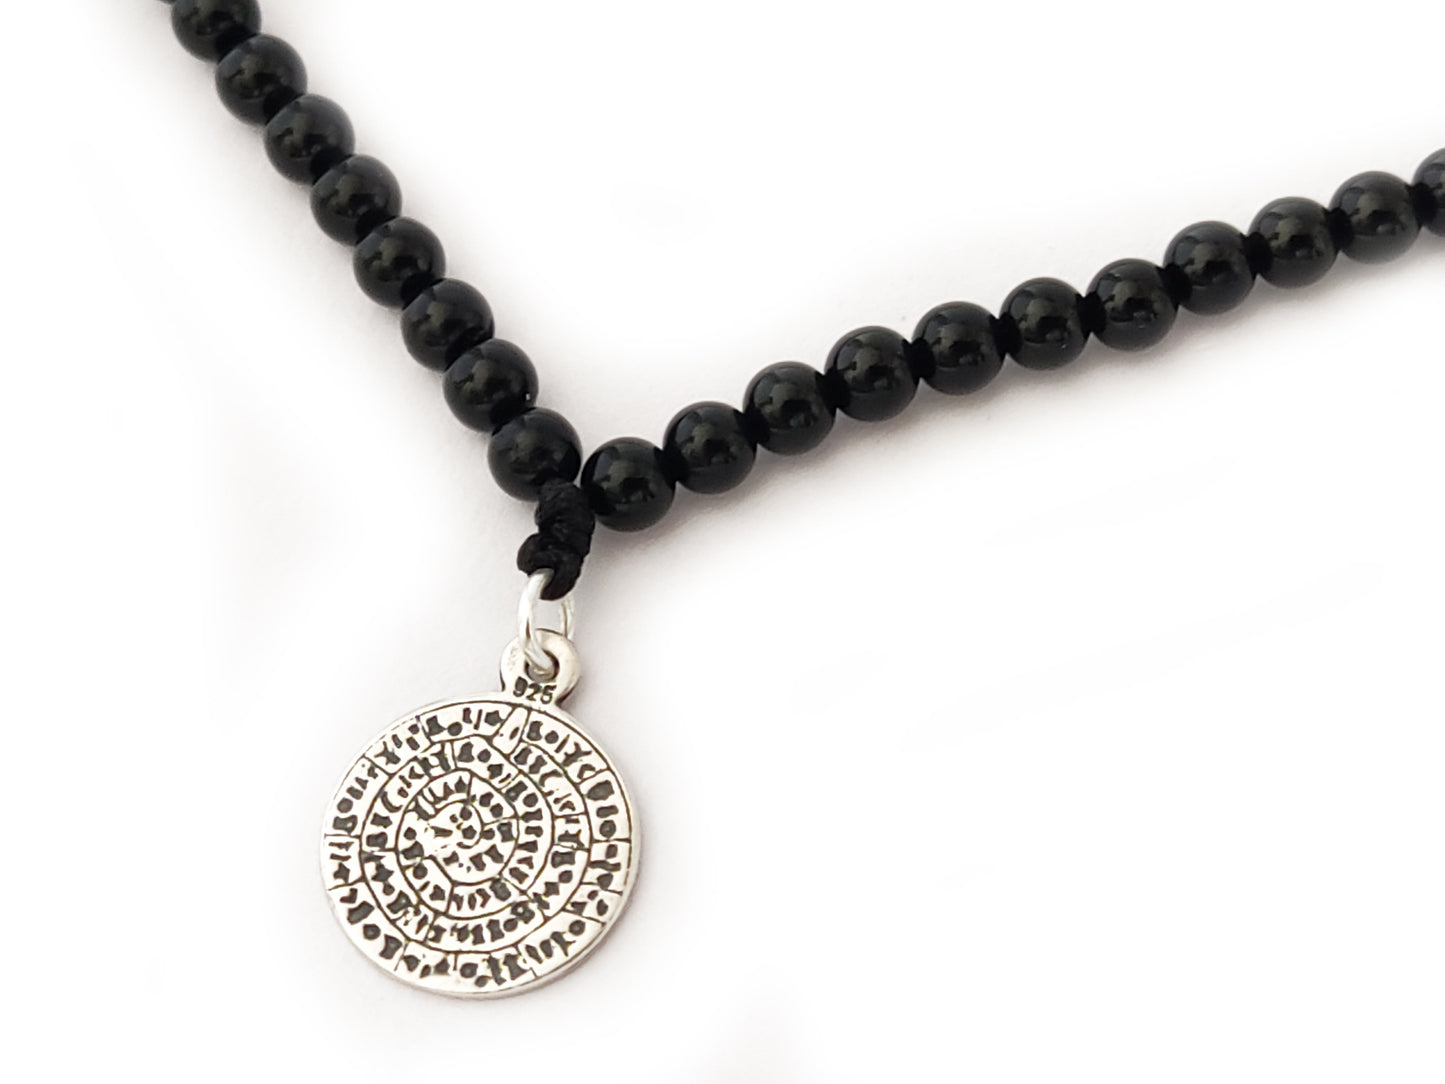 Phaistos Disc silver 925 pendant with natural black onyx stones 4mm. Handmade jewelry from Greece.